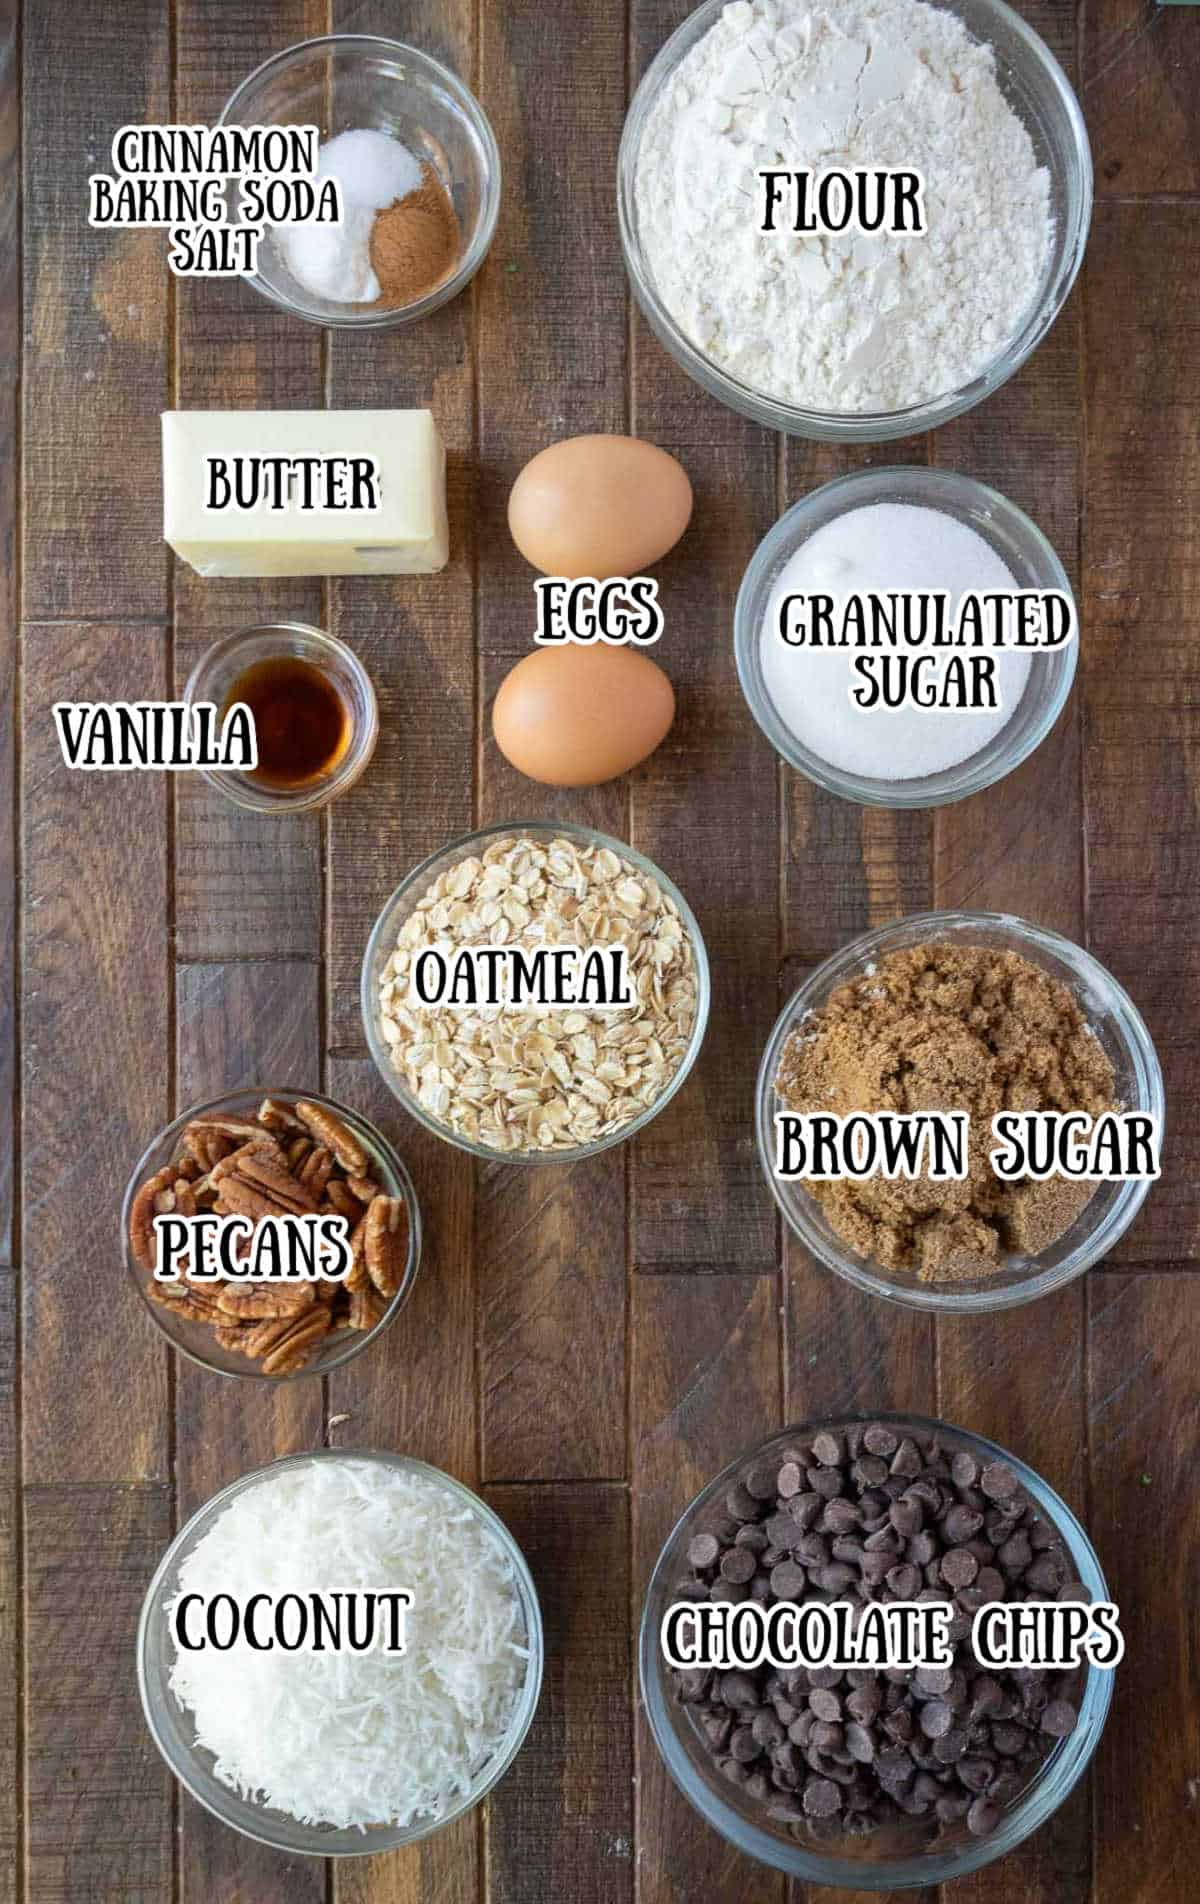 All the ingredients needed for these cookies.